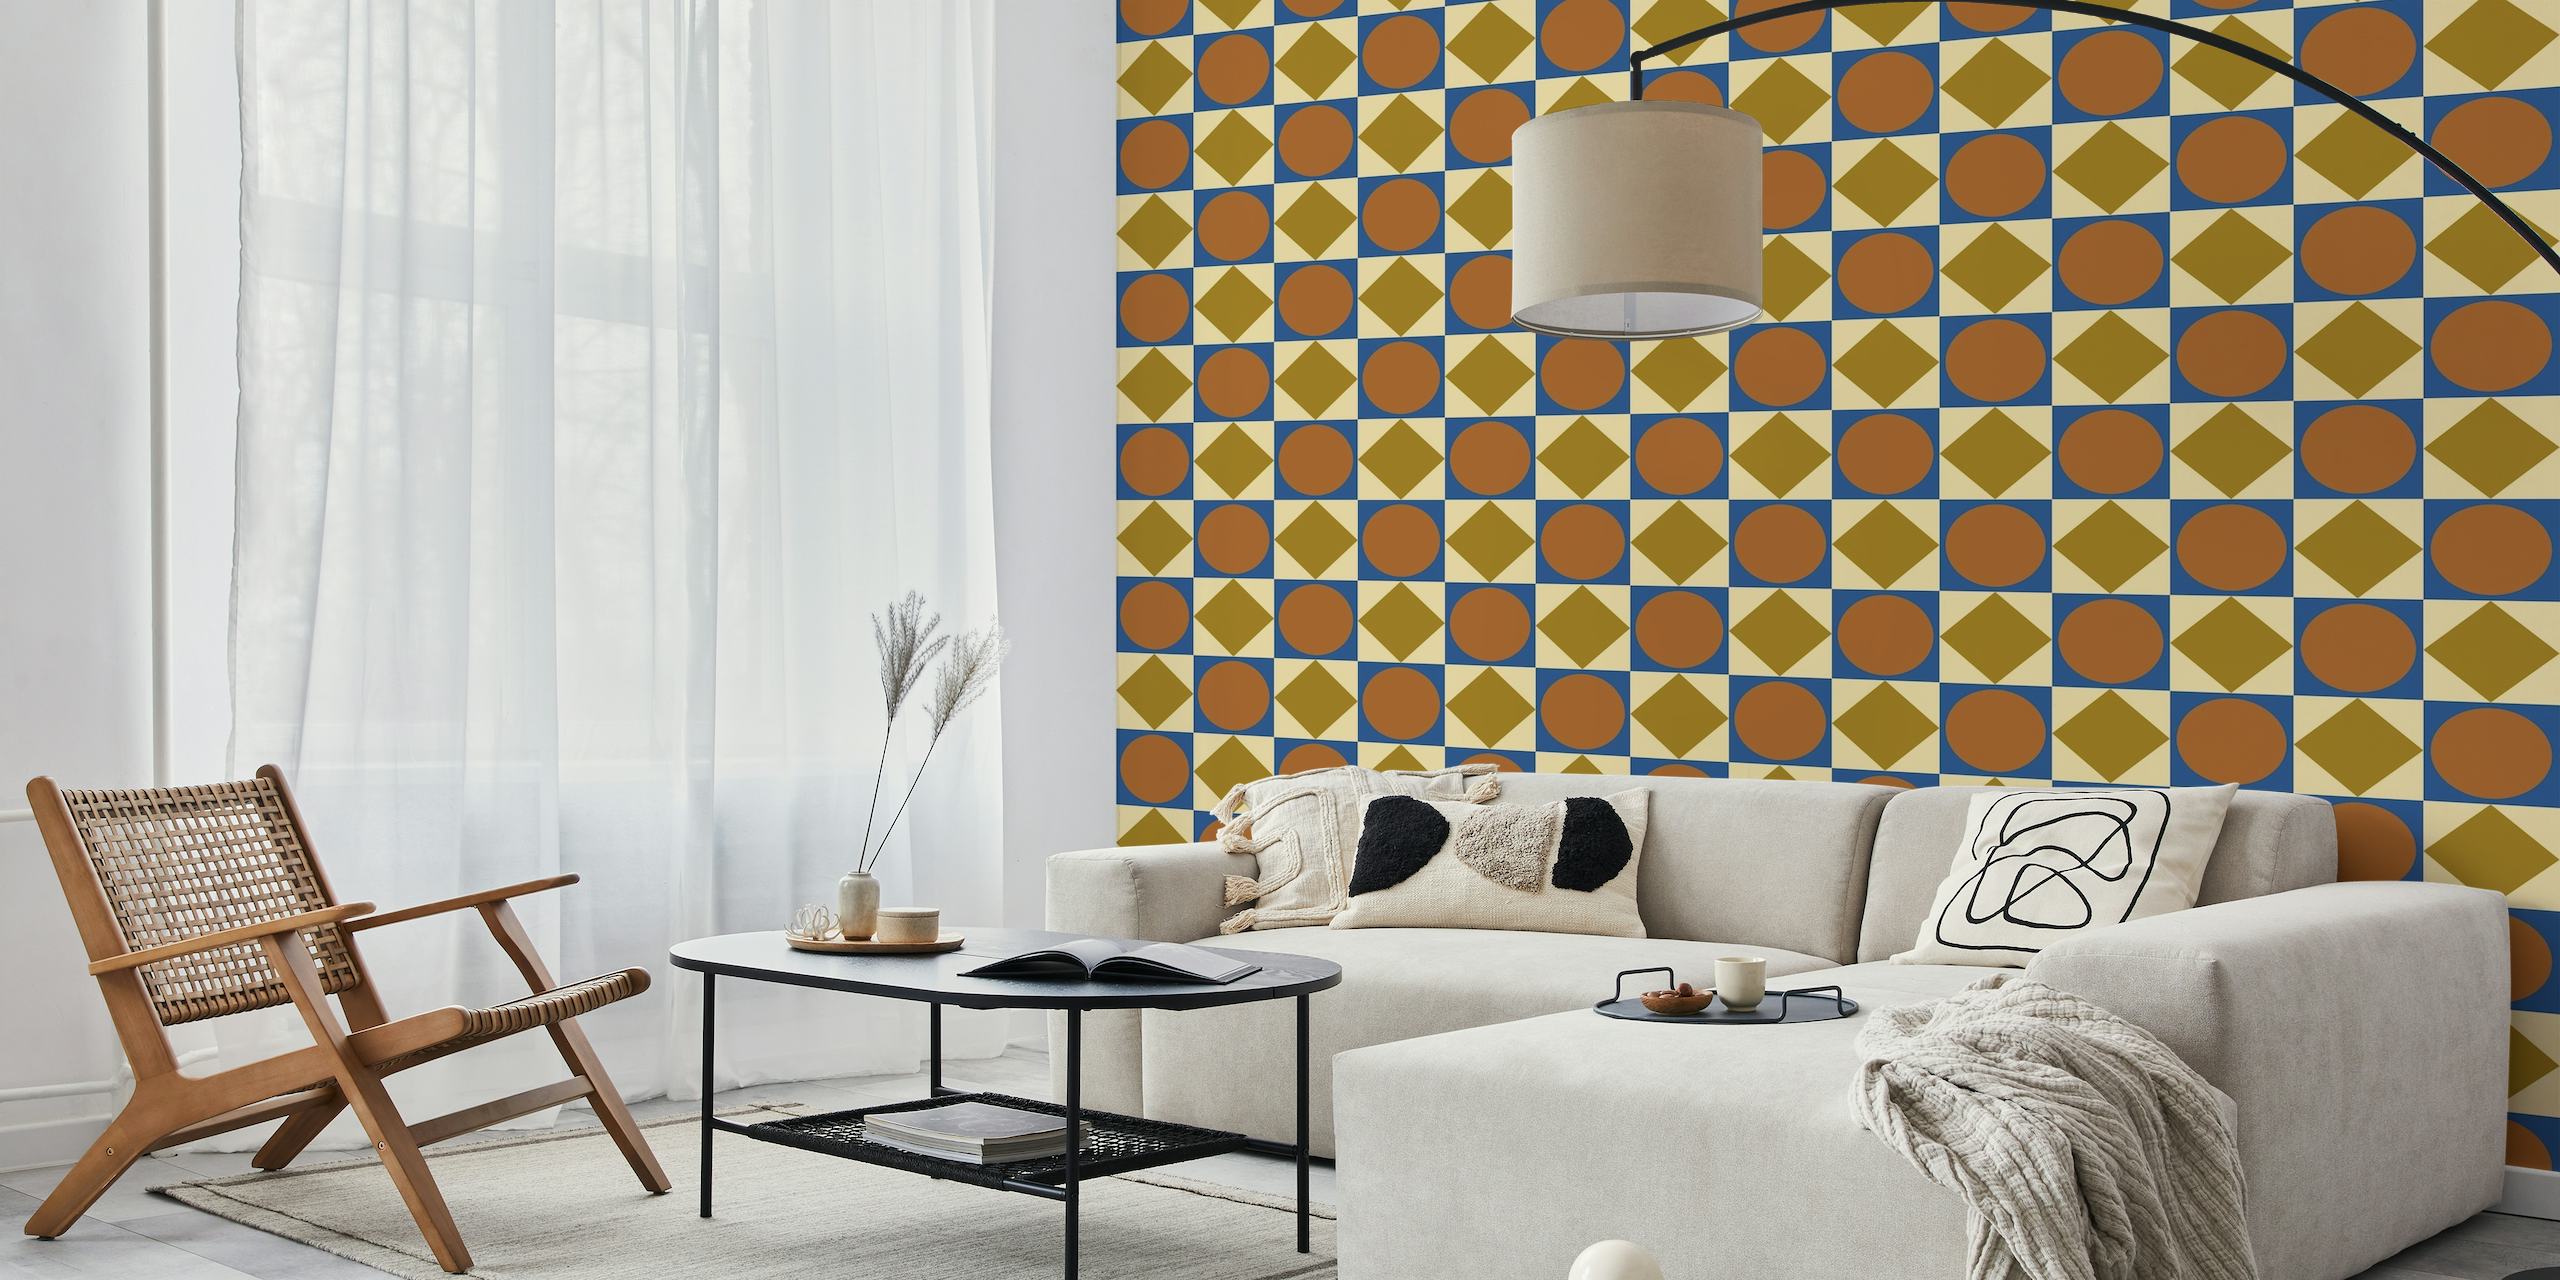 Geometric Shapes Pattern in Autumn Brown and Blue wallpaper